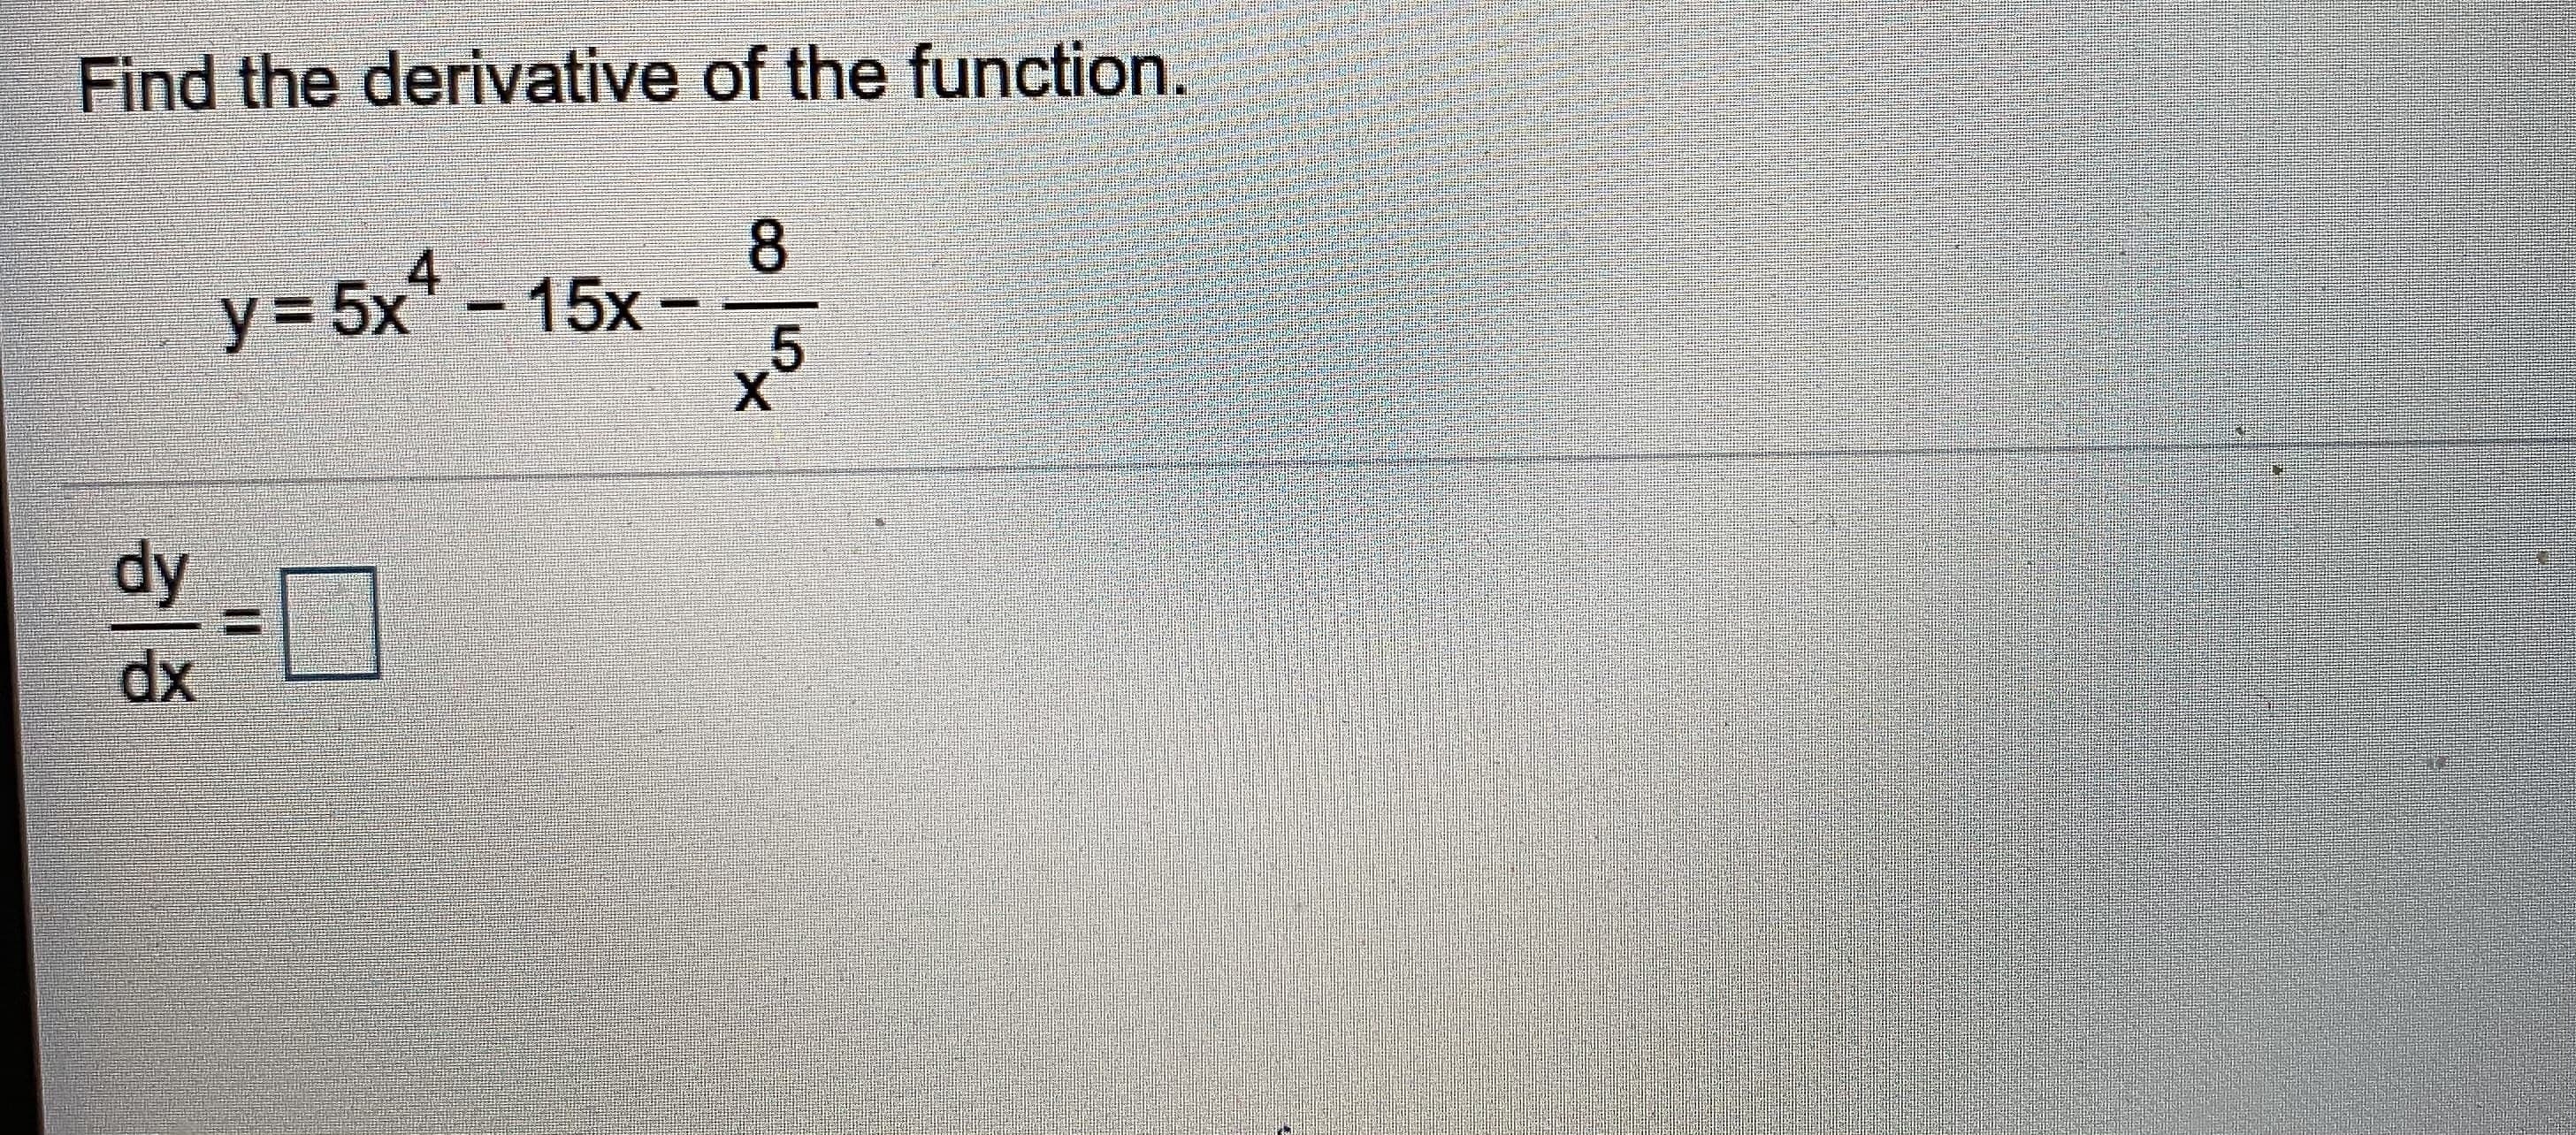 Find the derivative of the function
y = 5x* - 15x -
X.
